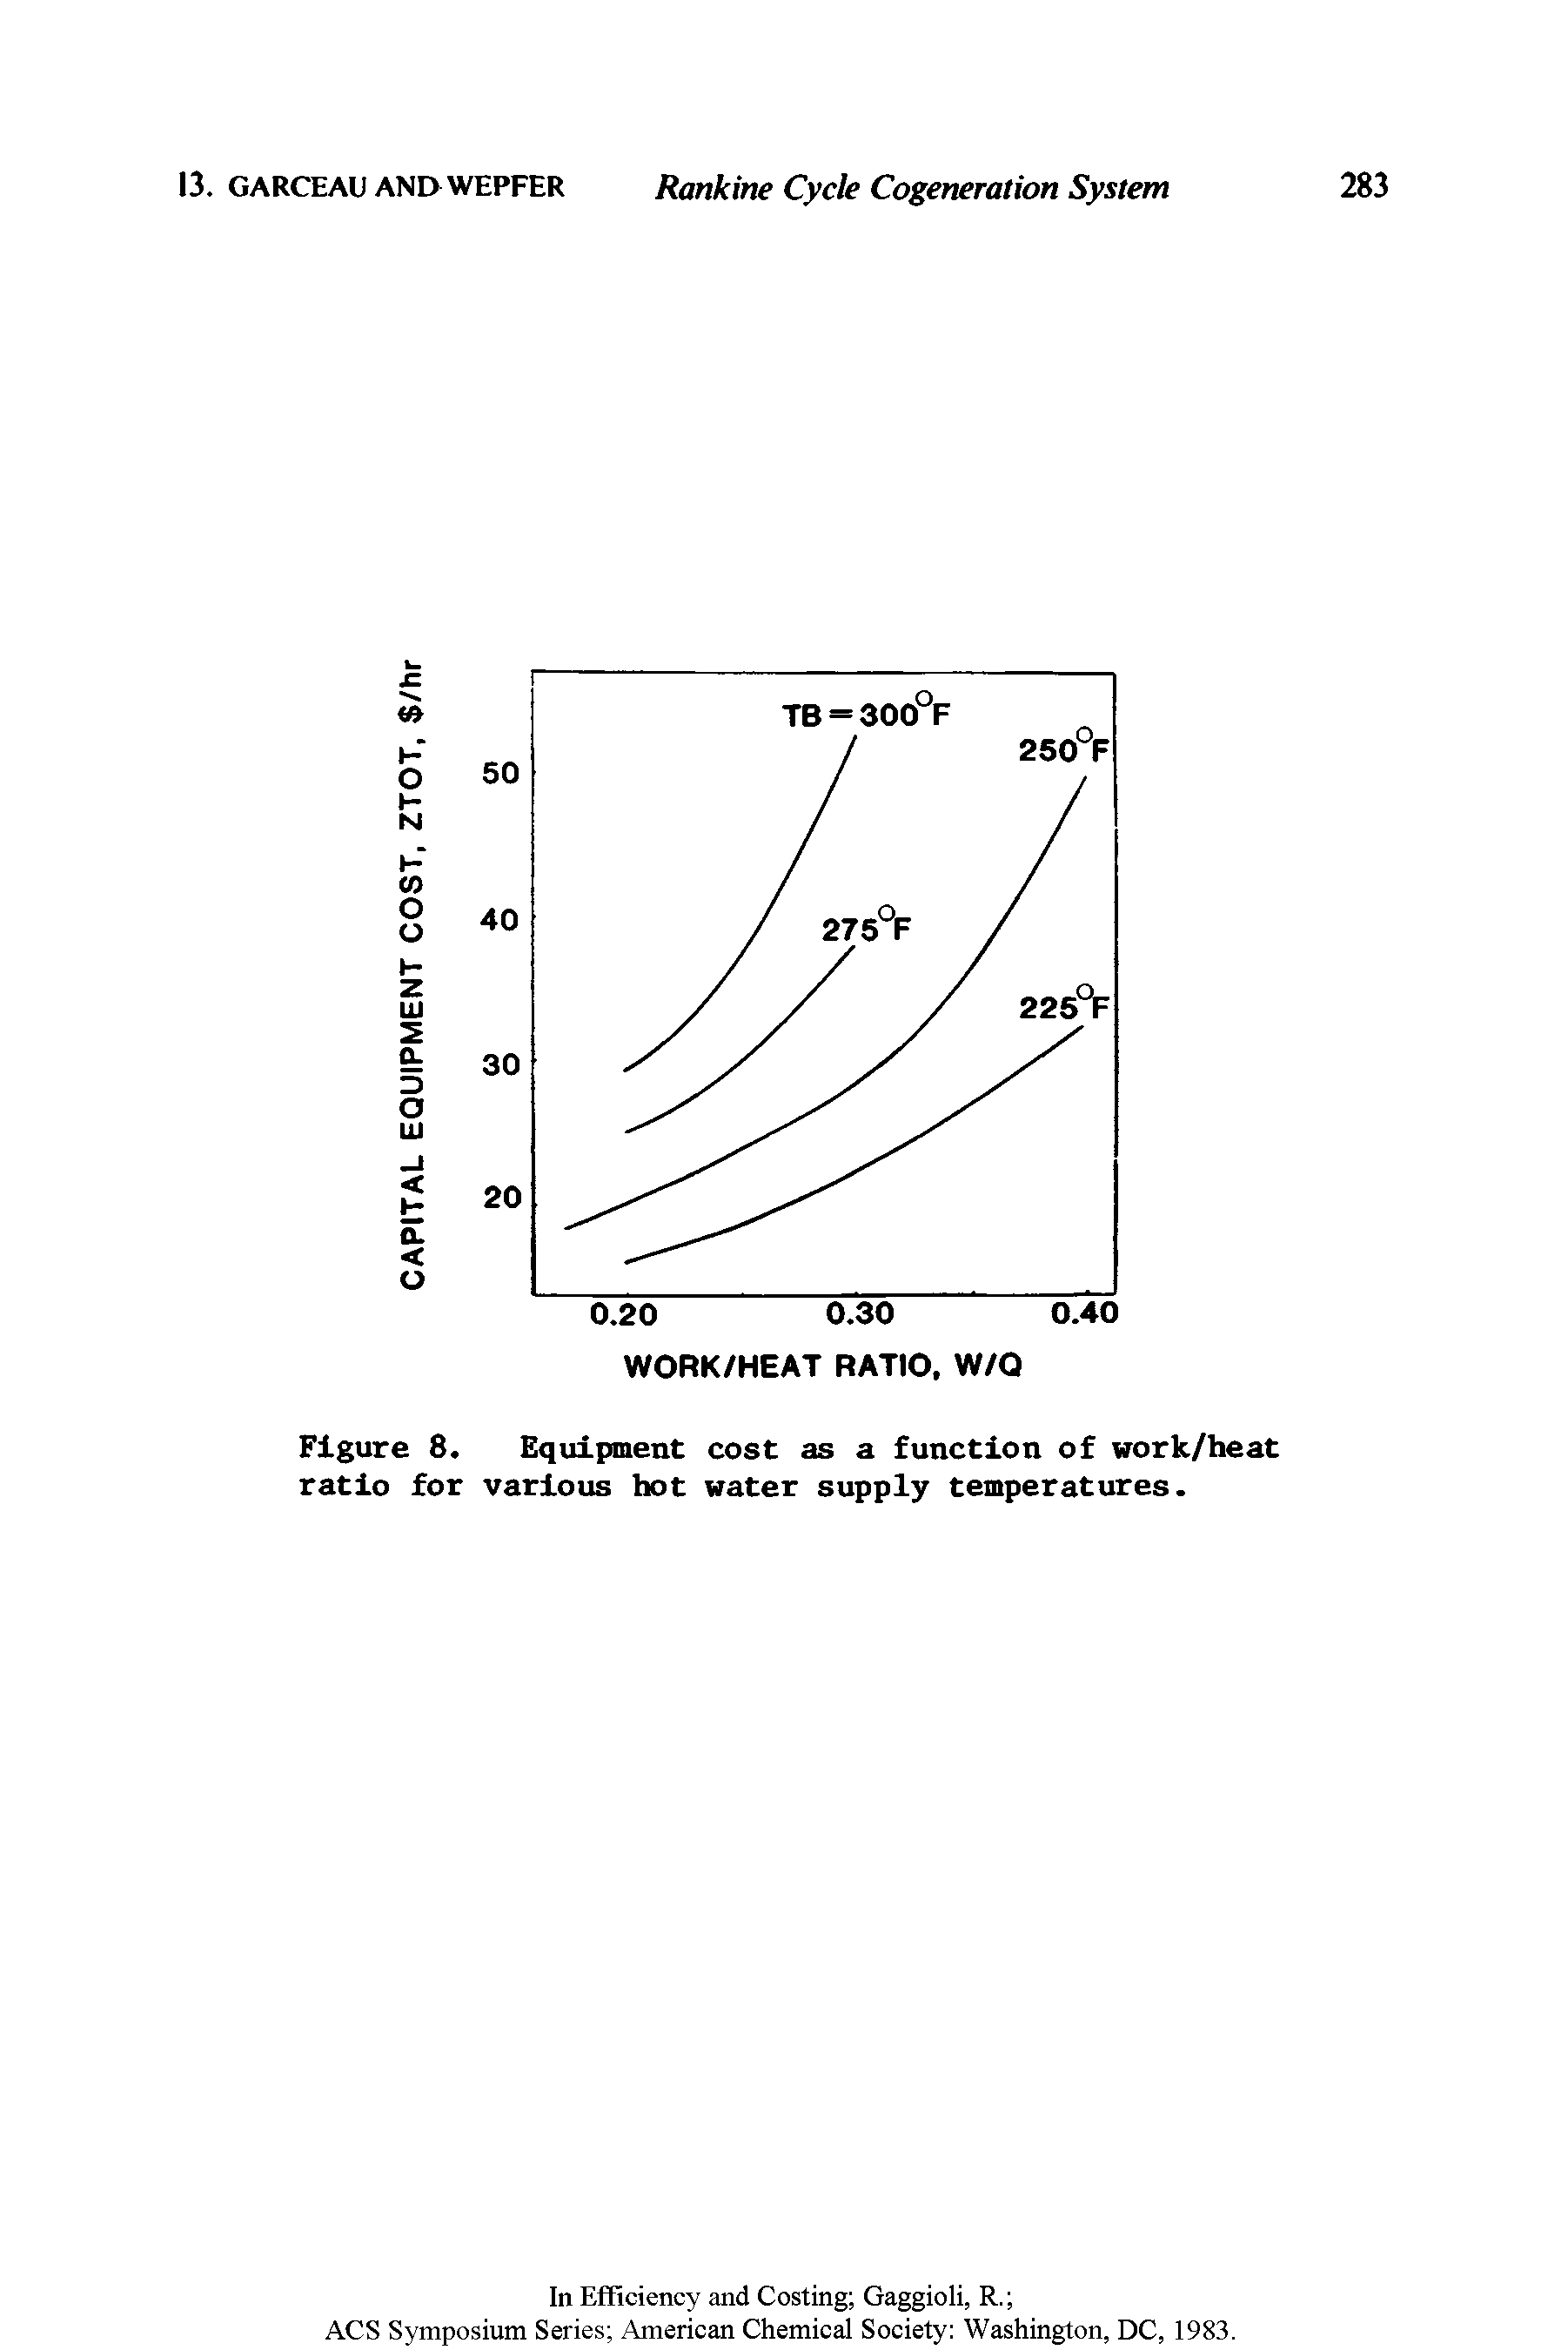 Figure 8. Equipment cost as a function of work/heat ratio for various hot water supply temperatures.